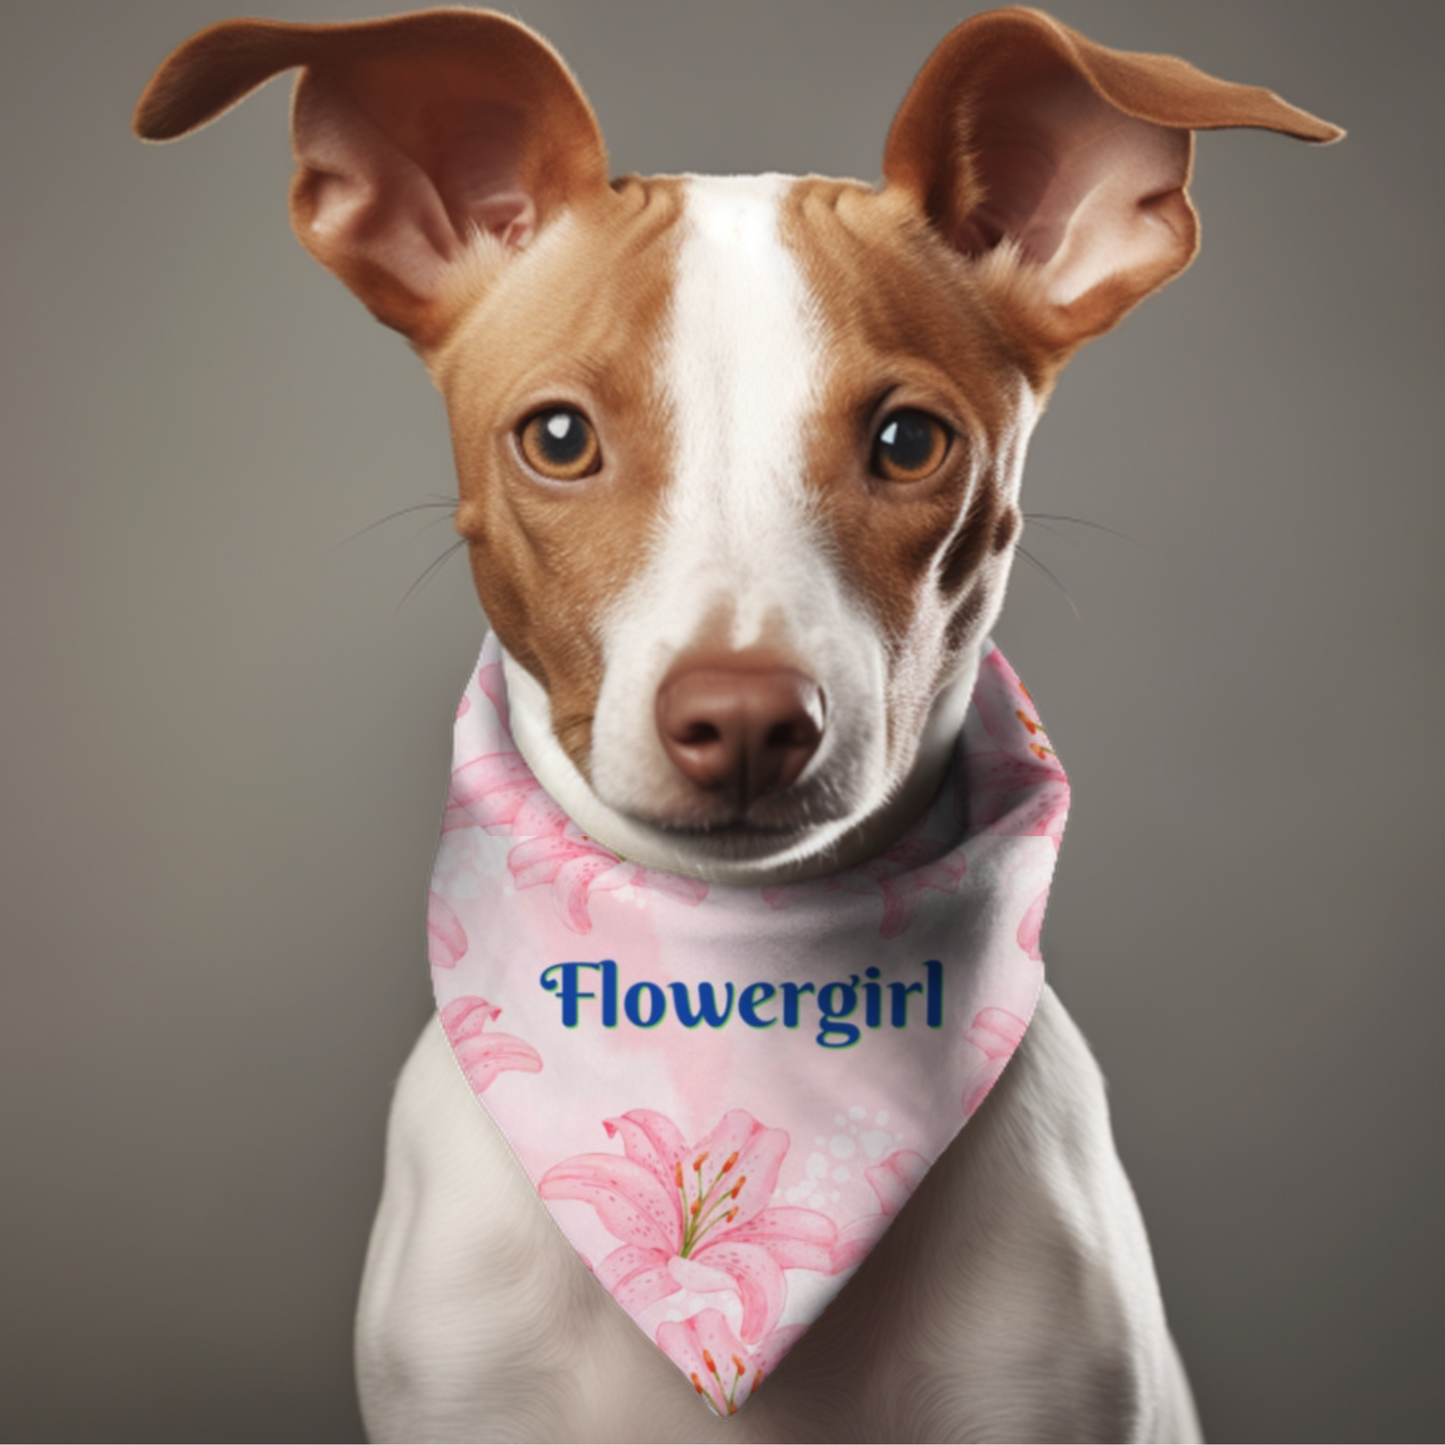 FurryFashionista Bridal Bandana COLLAR with Easy-On & Off Buckle - Pink "FLOWERGIRL" Style - Pink Hibiscus Motif